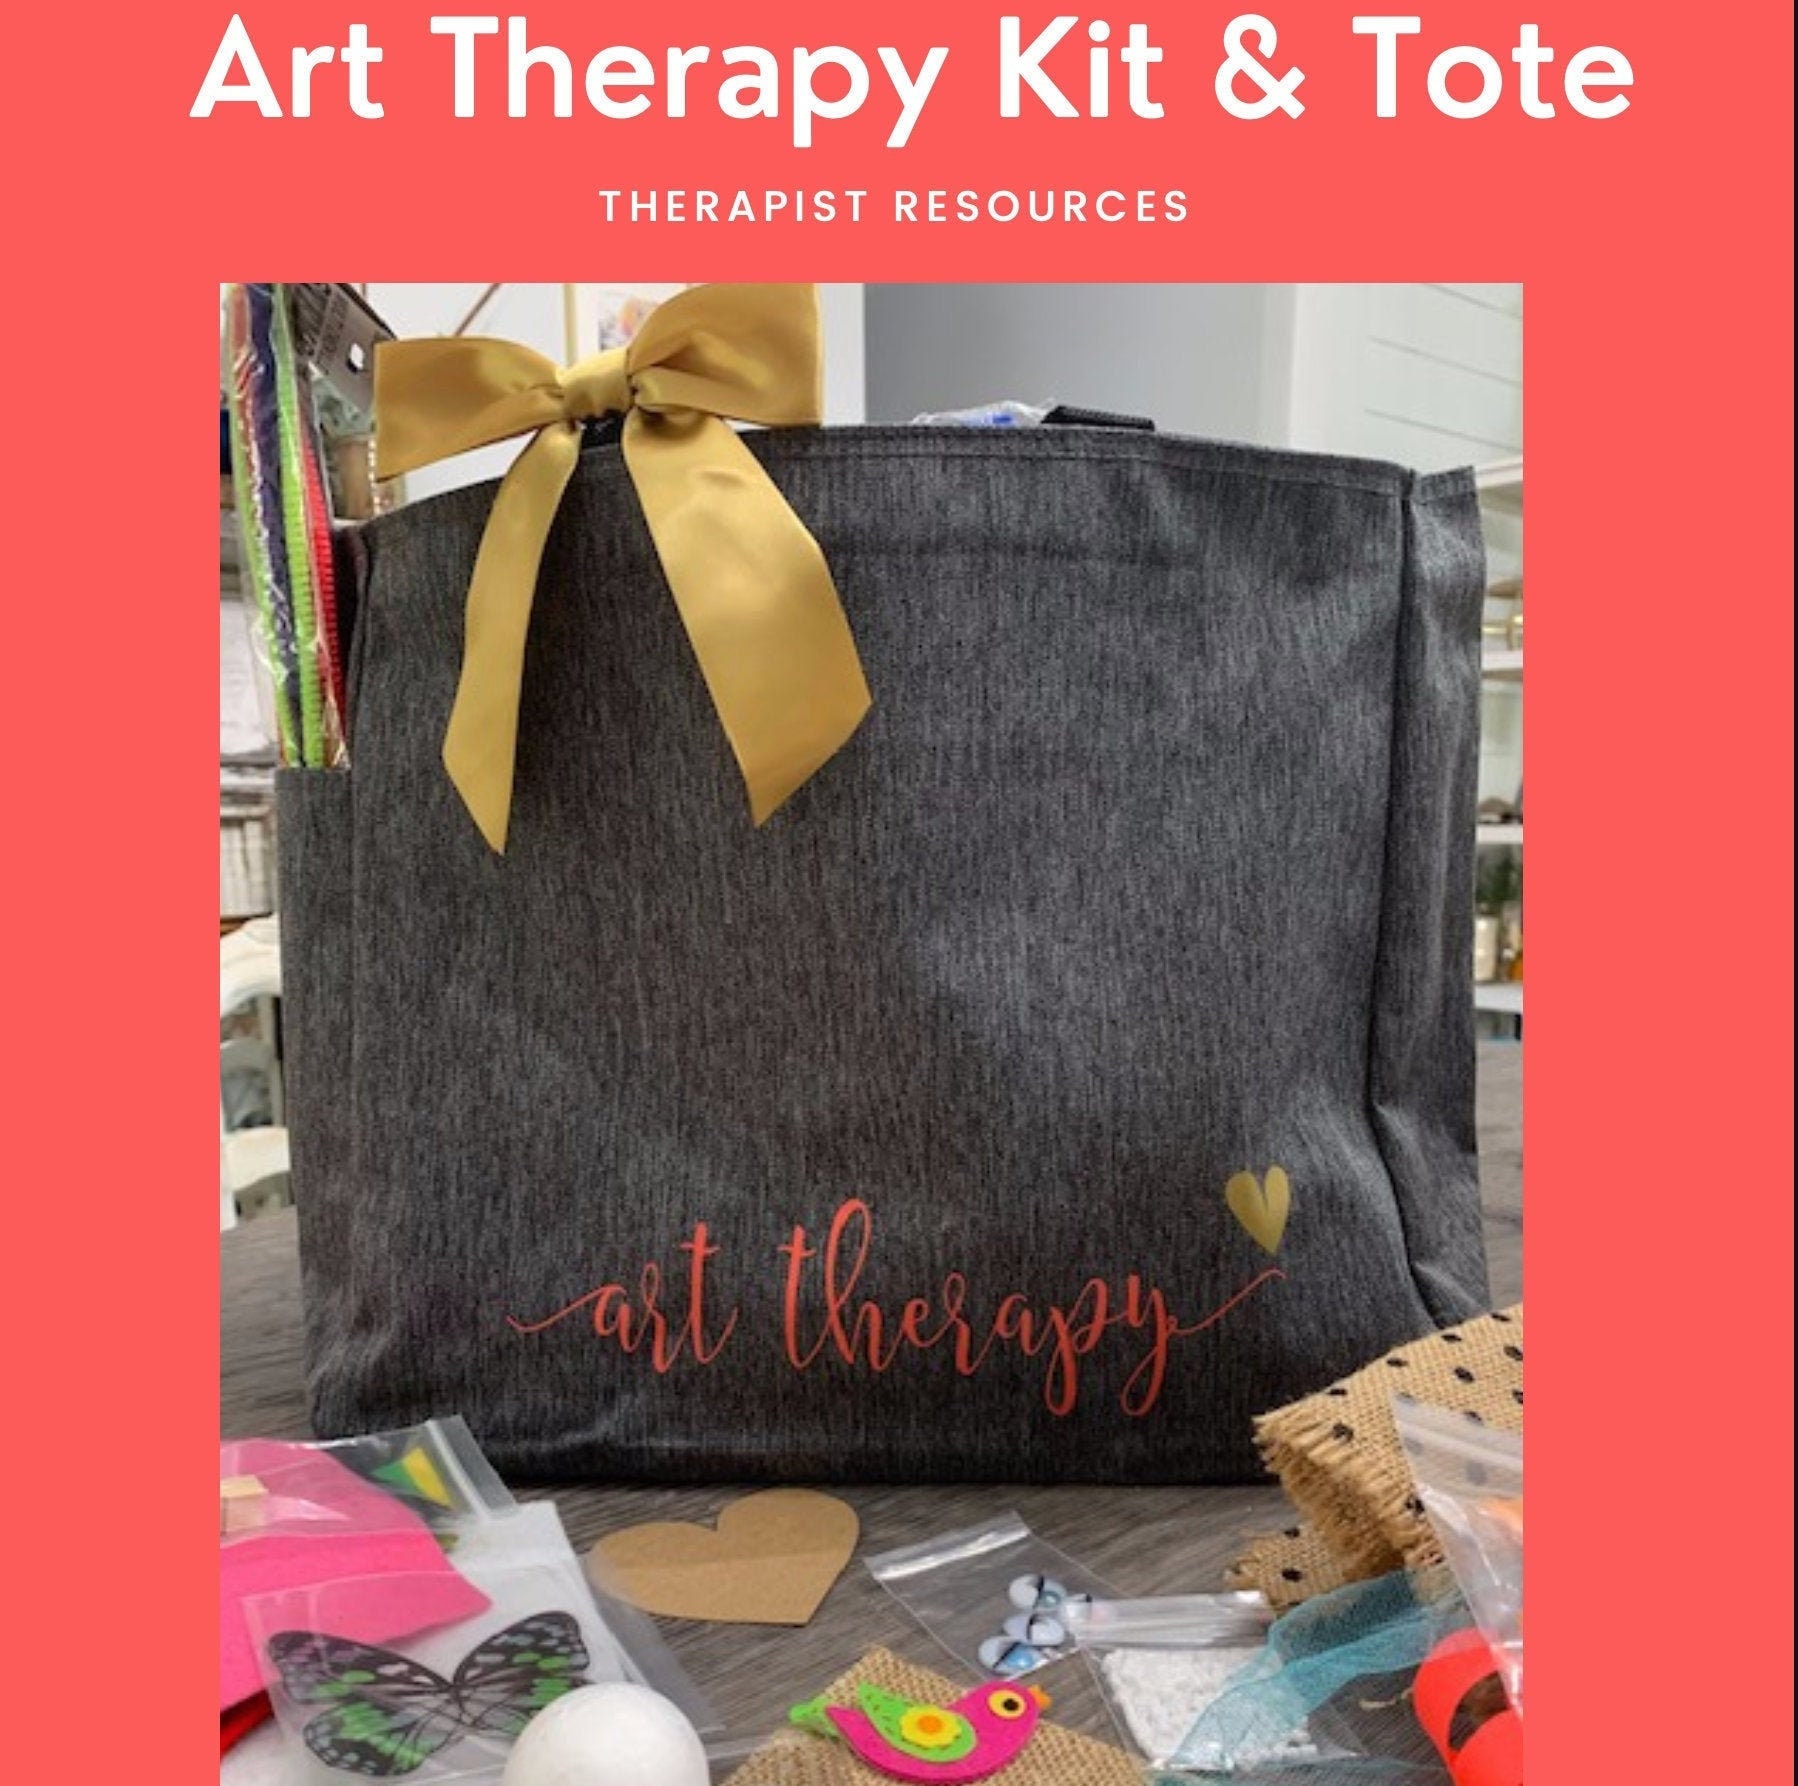 Expressive Art Therapy Supplies Kit - 20+ Art Therapy Activities, Alte –  Oefy